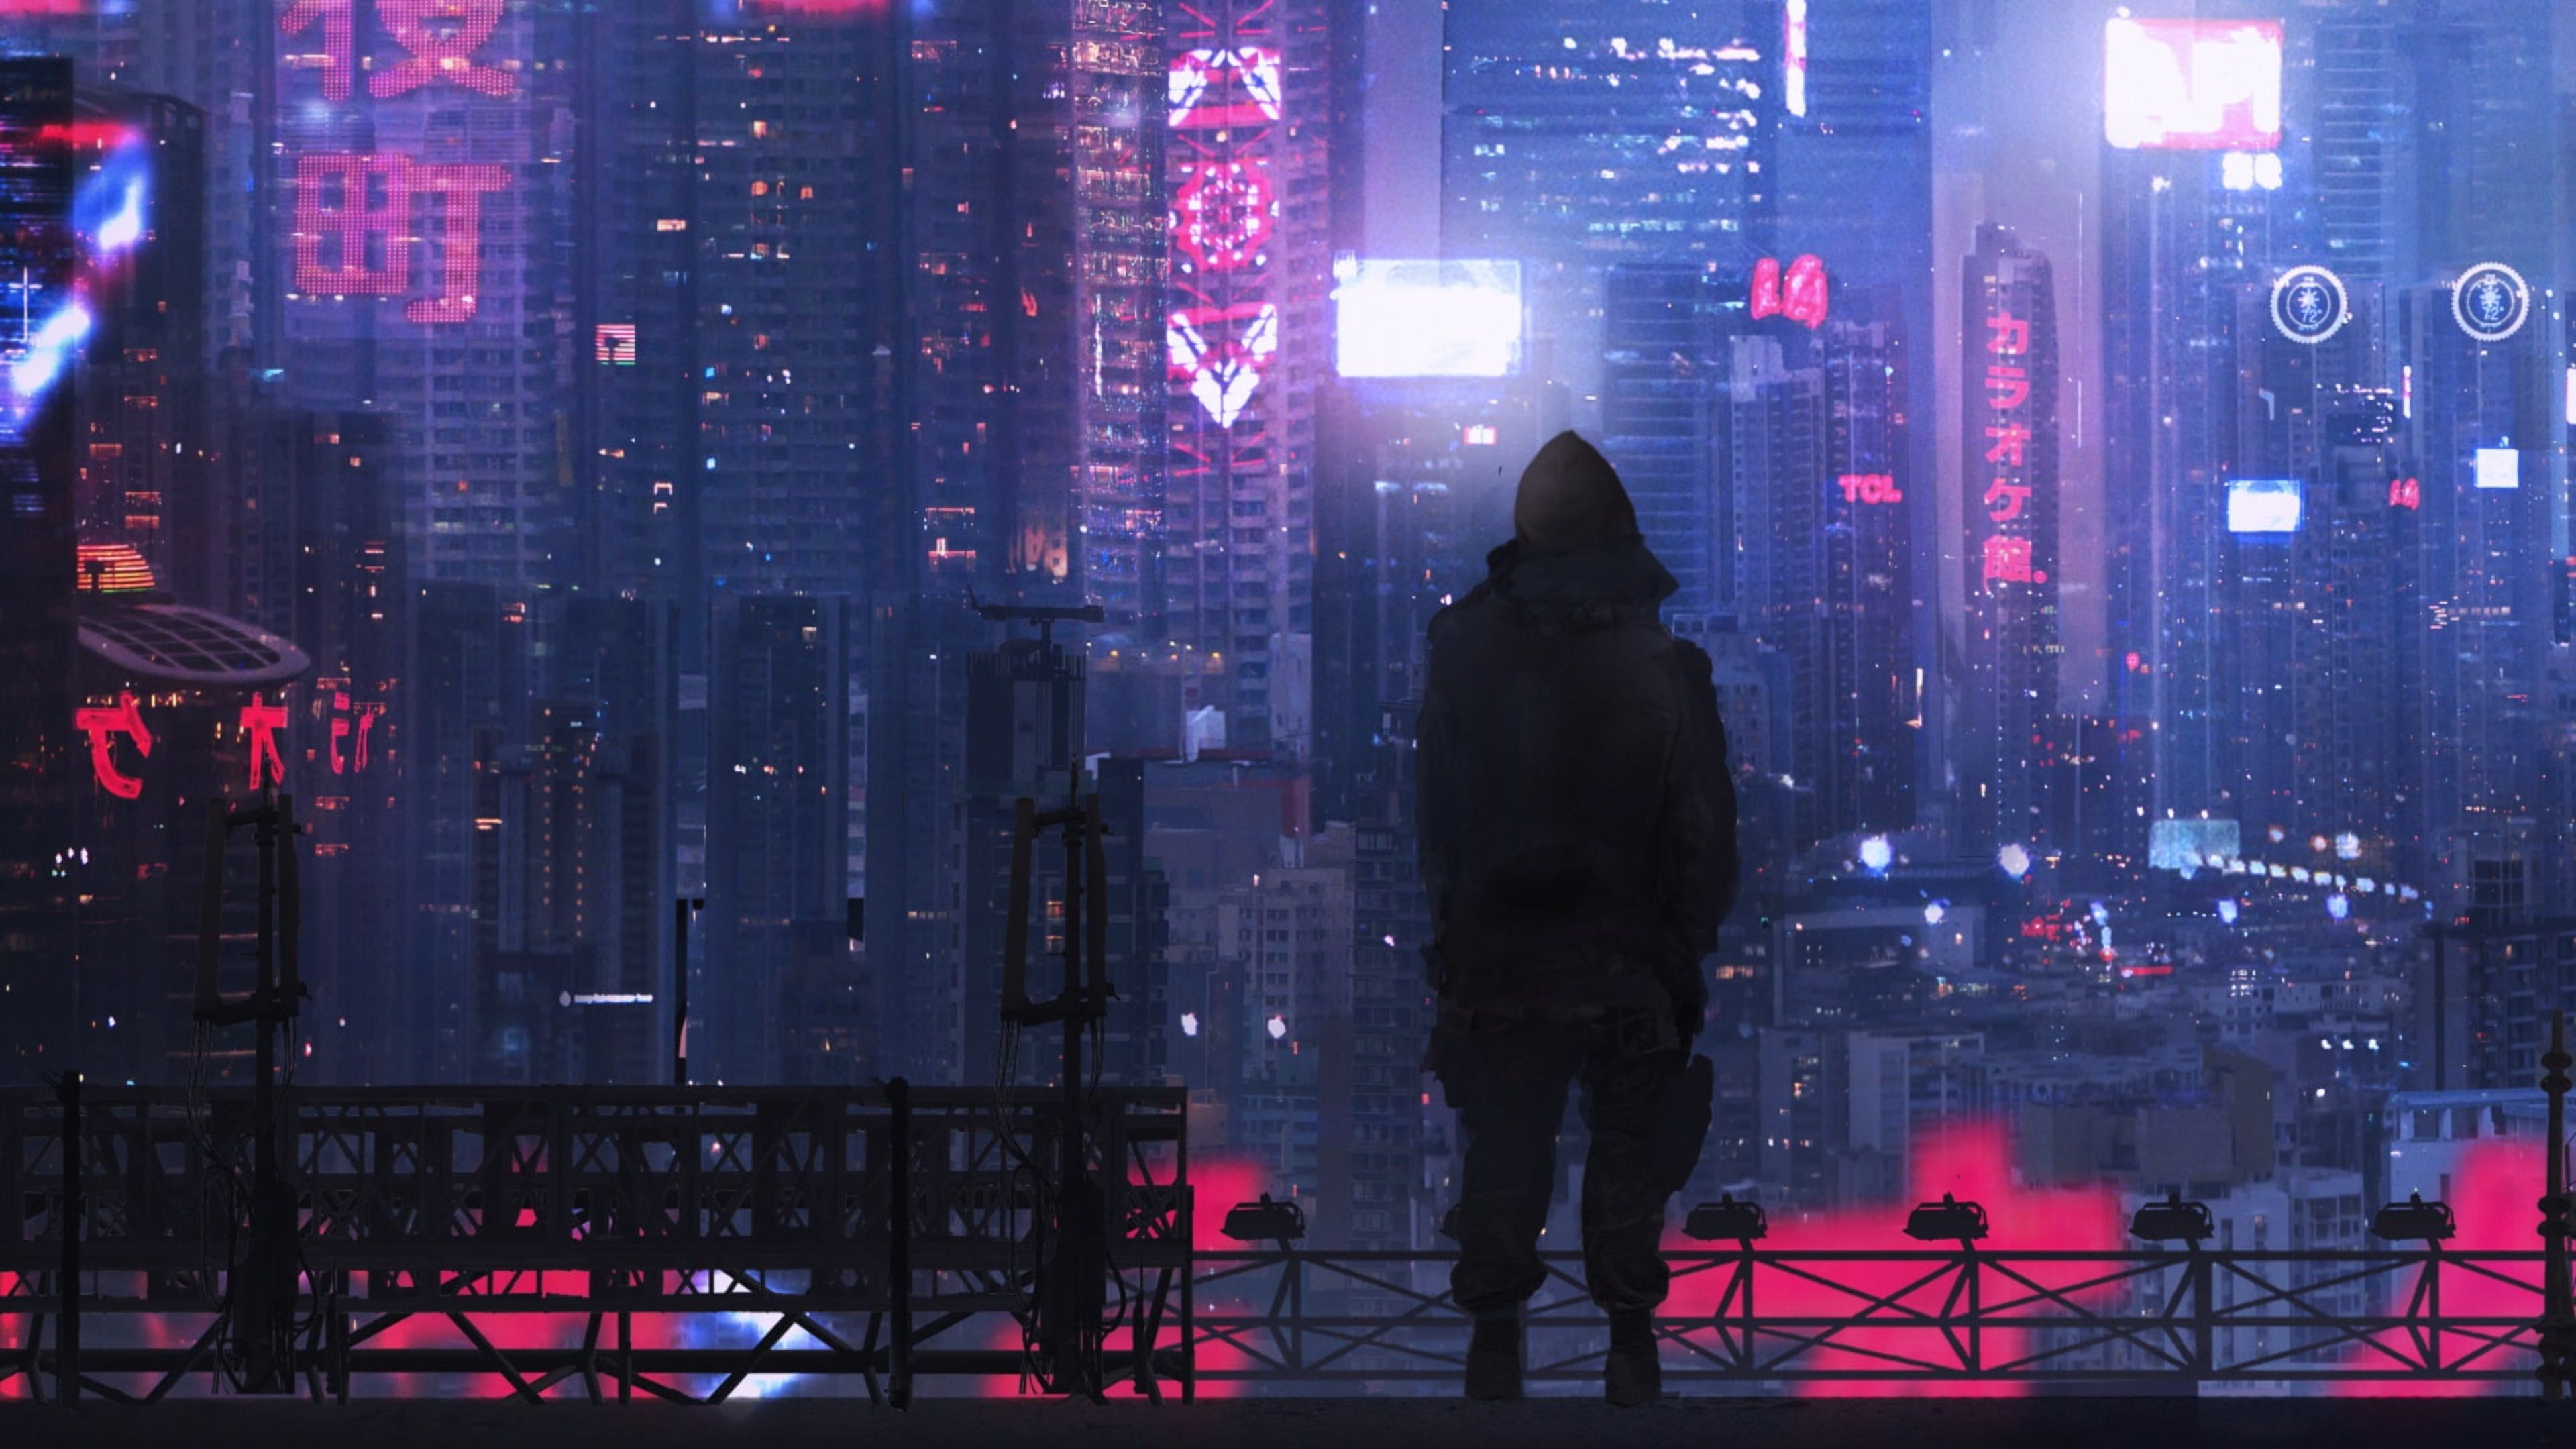 Cyberpunk 4k Wallpaper For Your Desktop Or Mobile Screen And